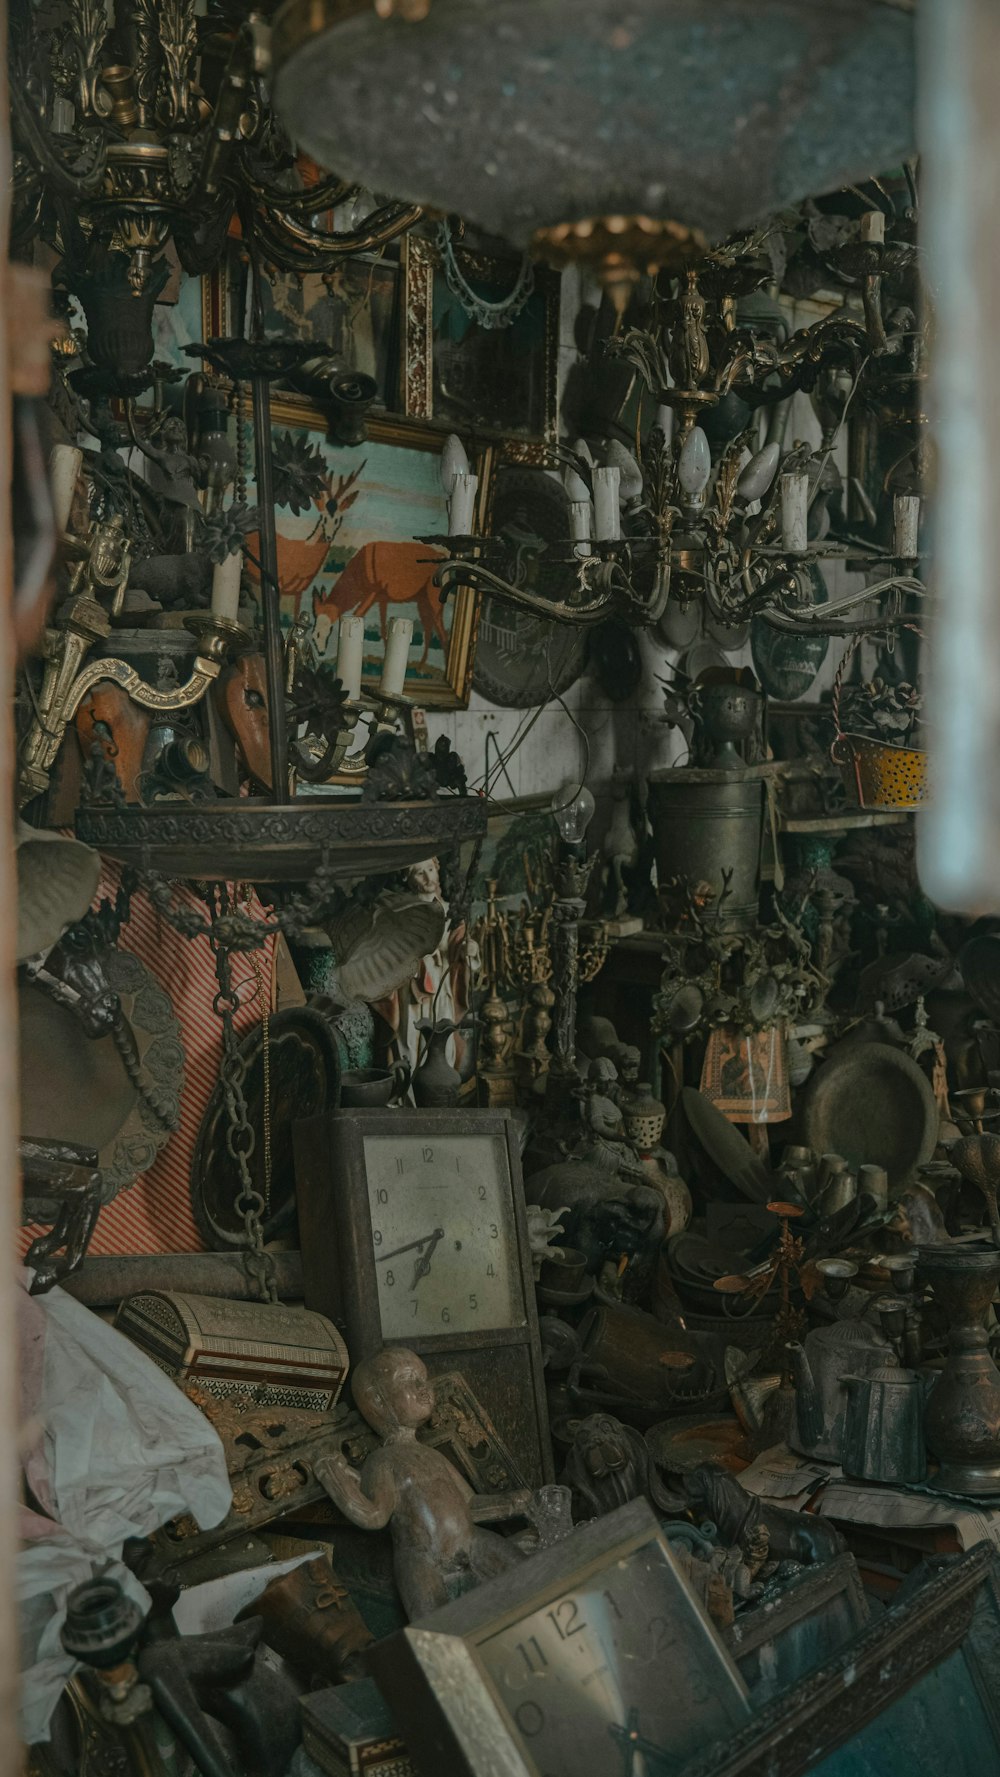 a room is filled with old items